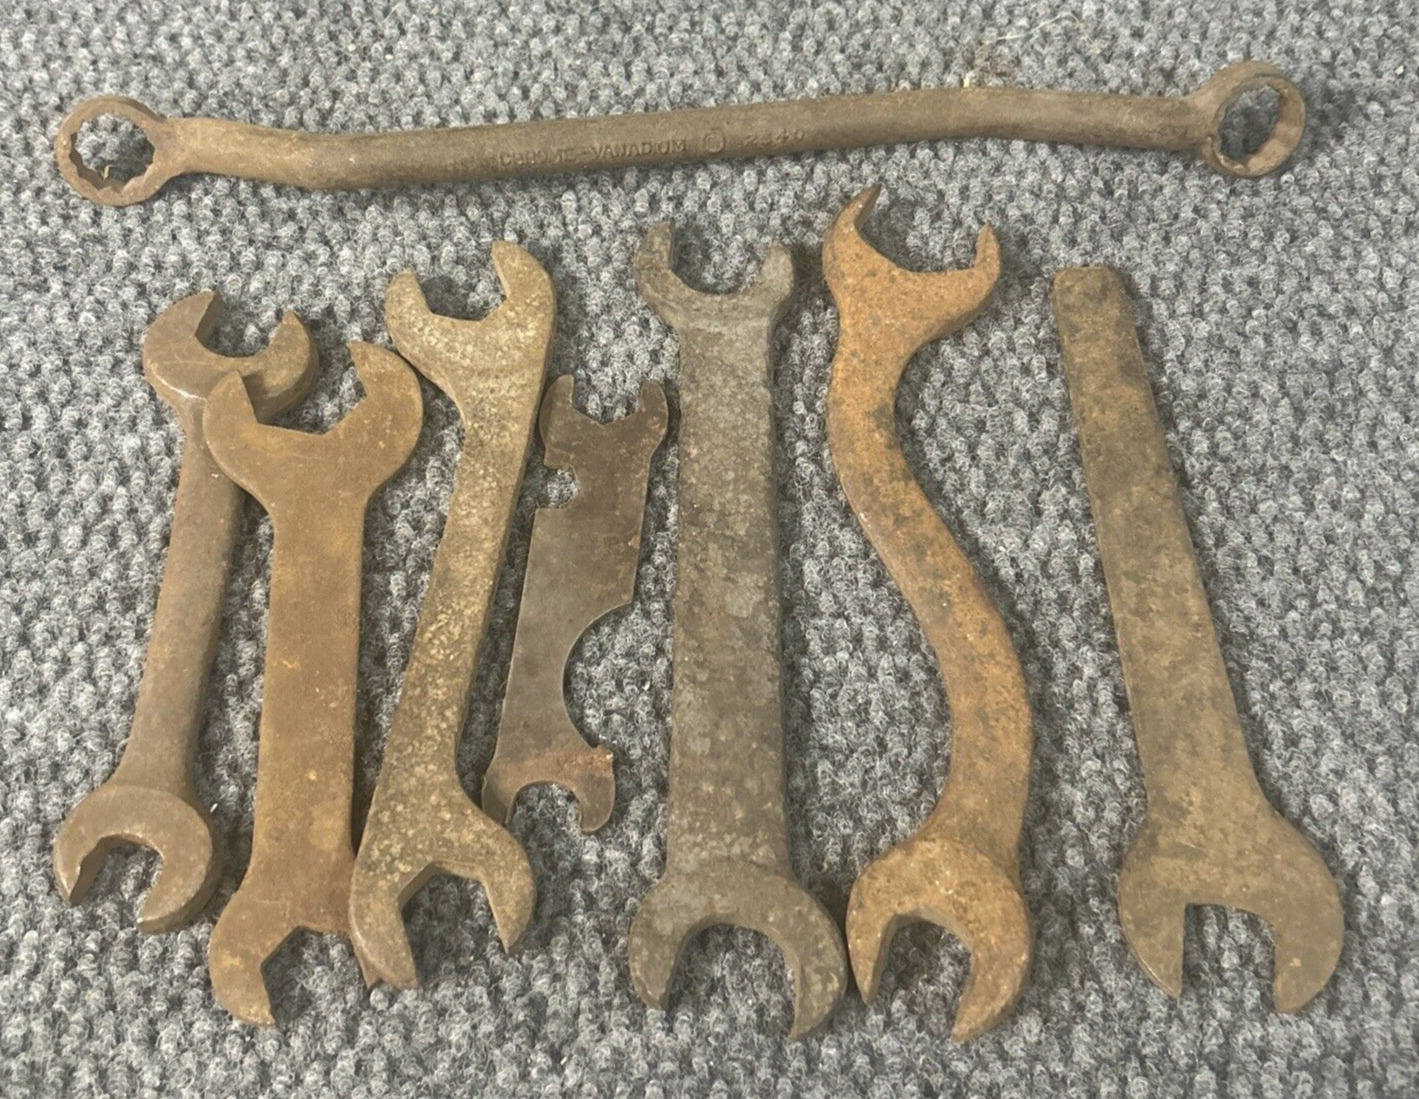 Vintage Antique Lot Of 8 Wrench Wrenches Tools USA Distressed Bonney Others